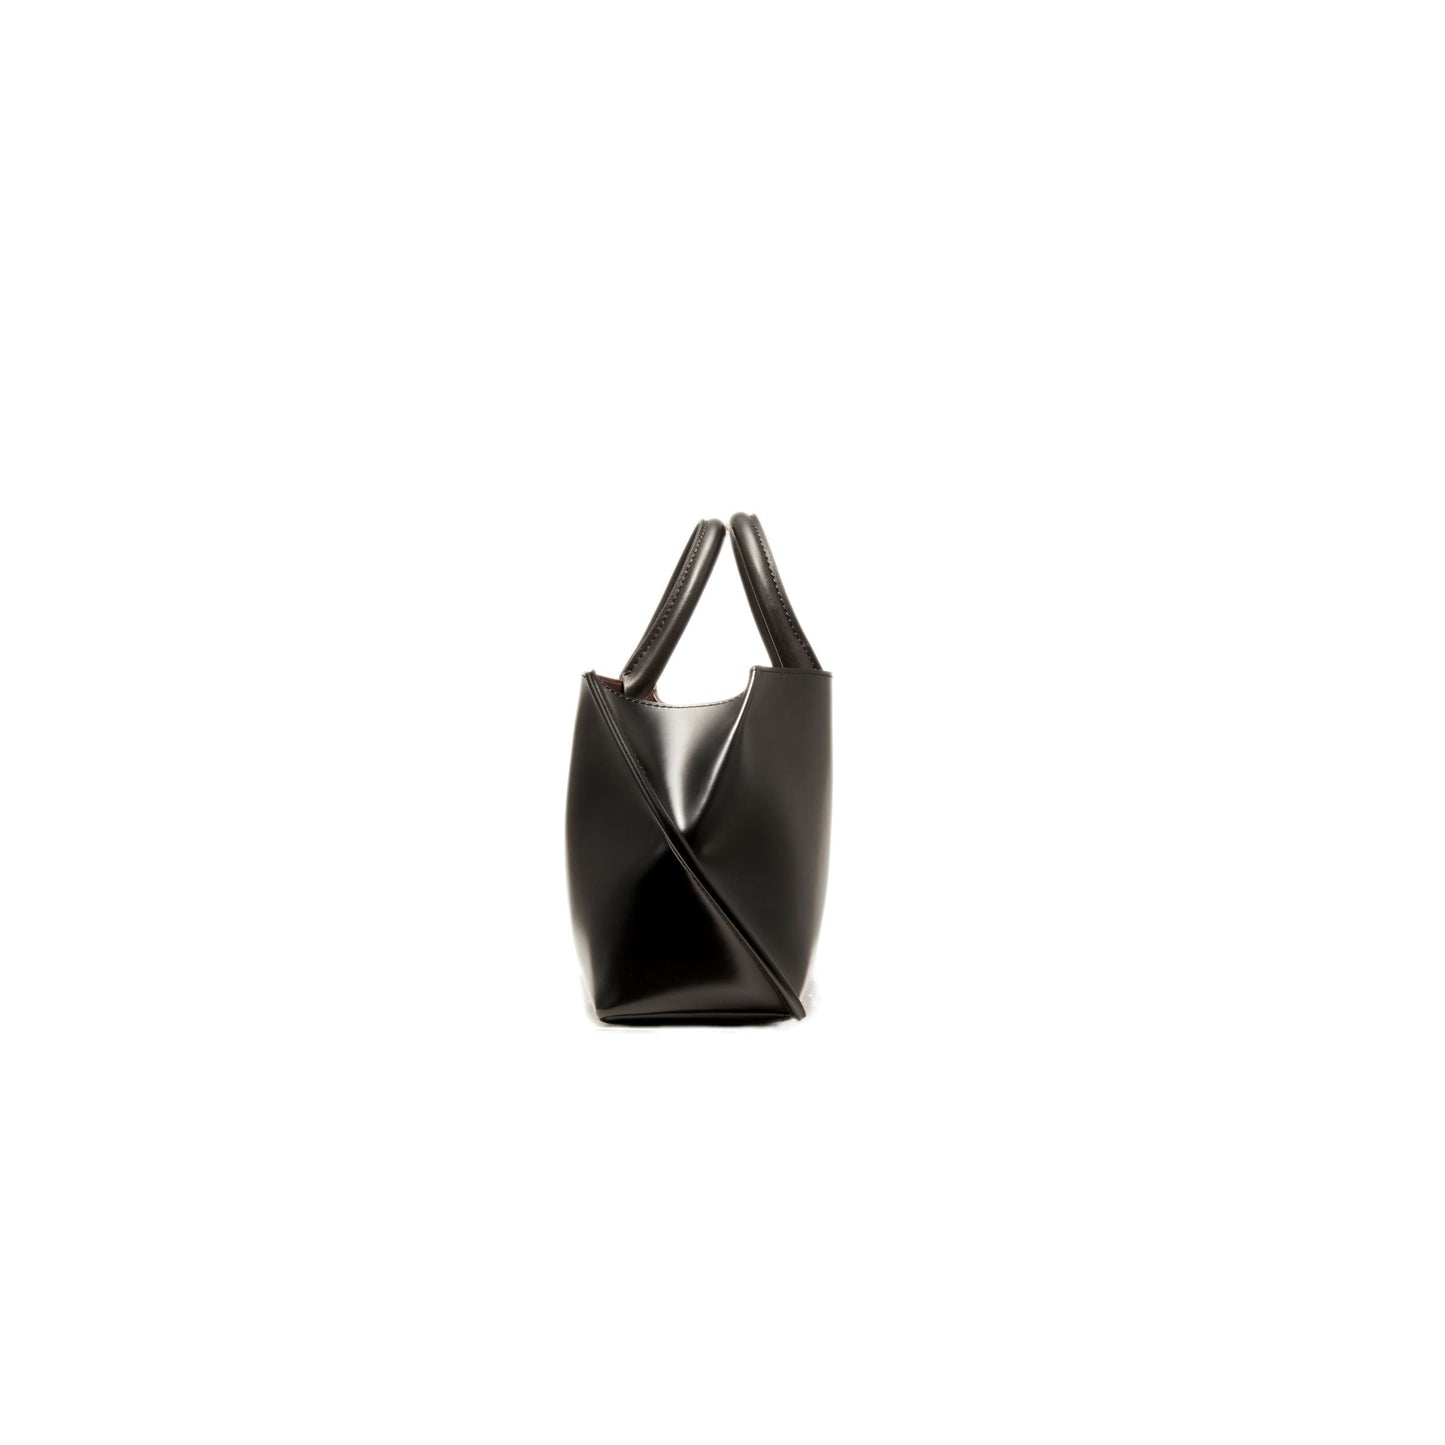 【Courtney Orla / コートニーオーラ】SLOPE wine tote S PVC/Pig L./Cow L. - Black/Chinese Red